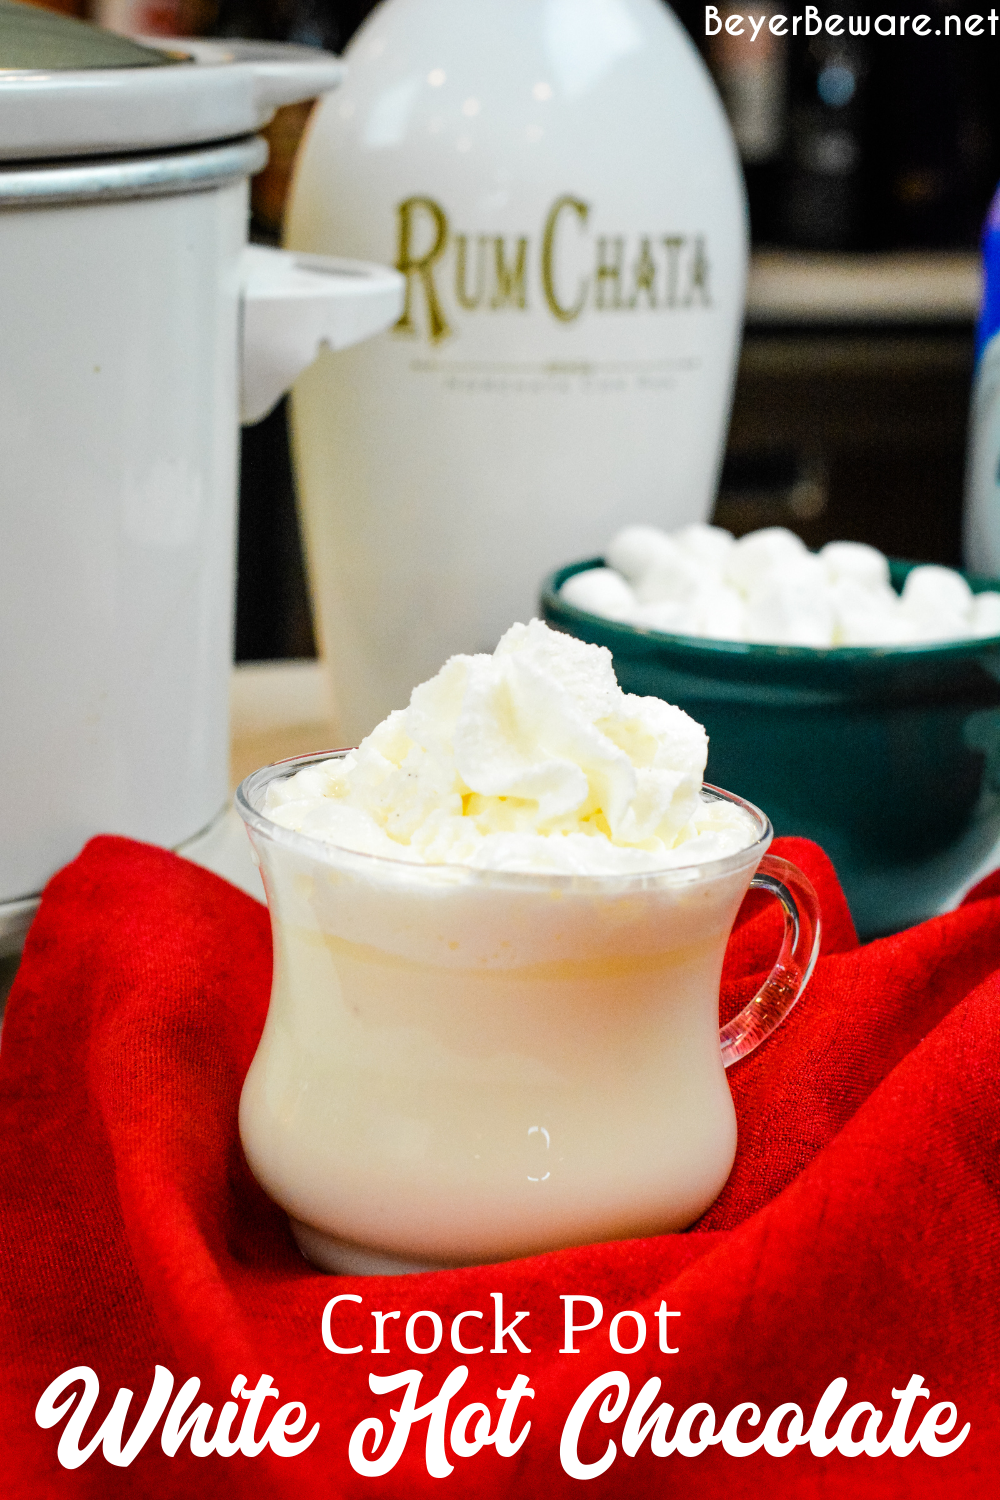 Crock Pot White Hot Chocolate recipe is one of the most decadent hot drink recipes that is perfect with a little Rumchata.